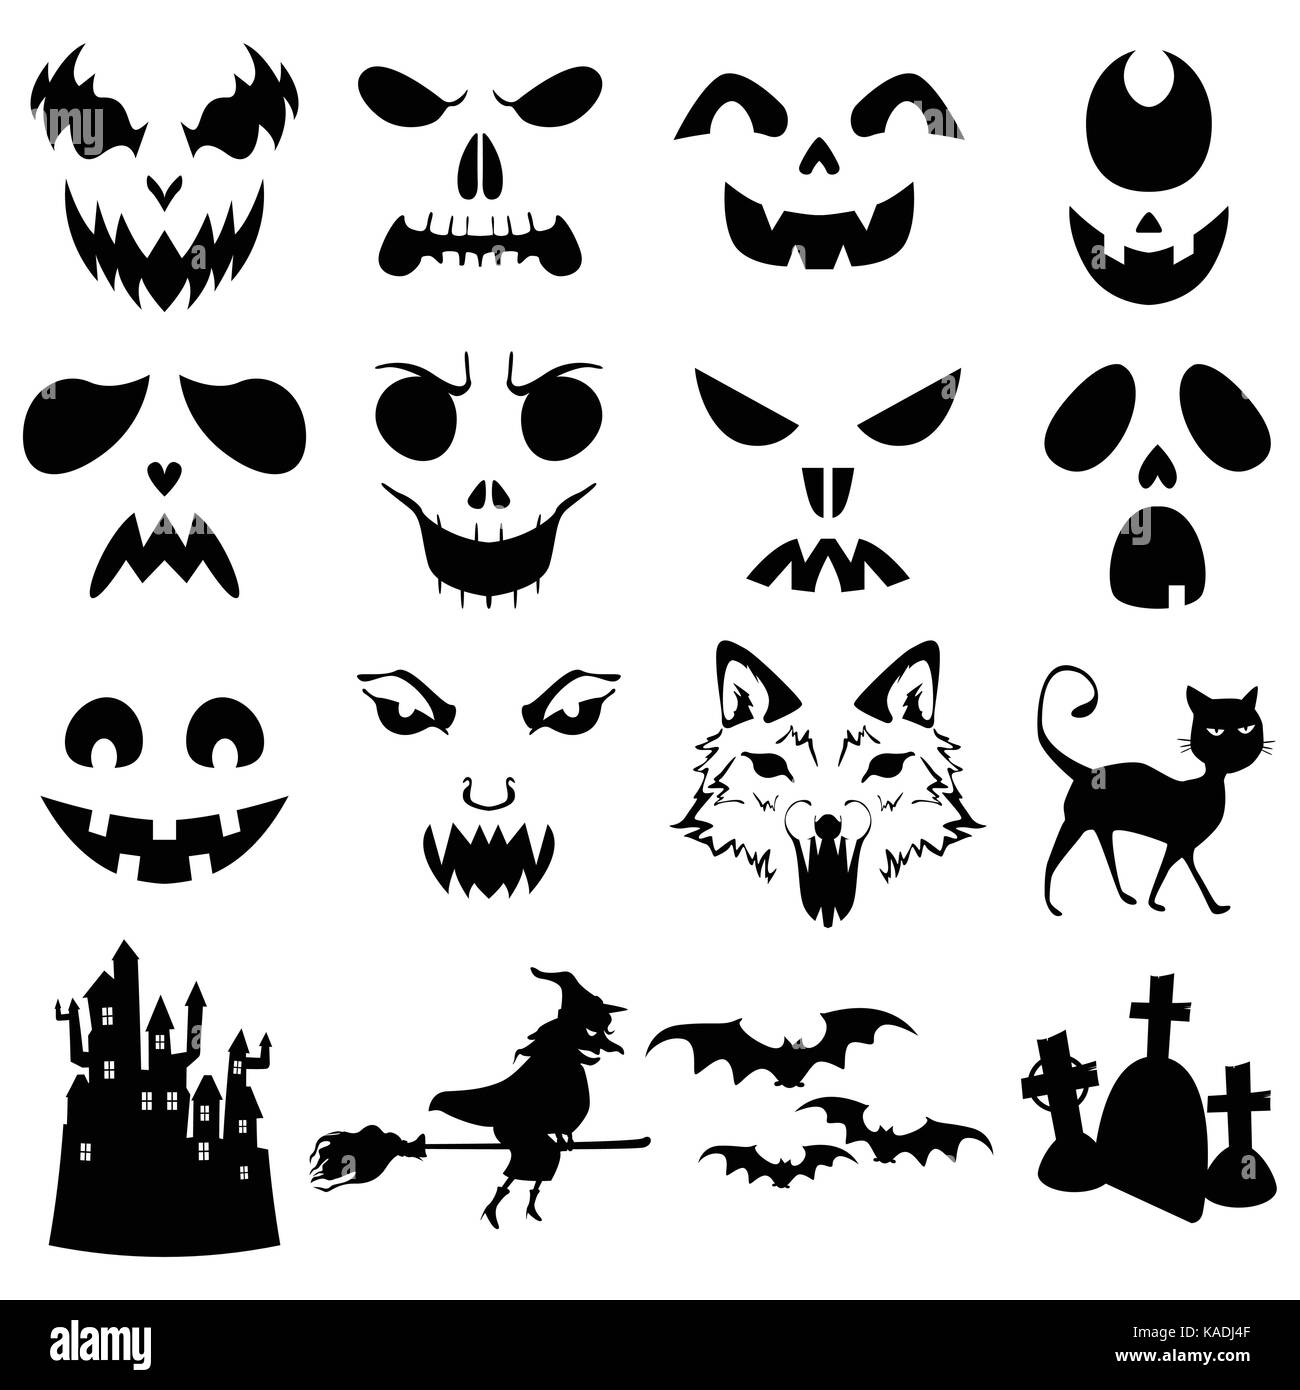 A vector illustration of Halloween Pumpkins Carved Silhouettes Template Stock Vector